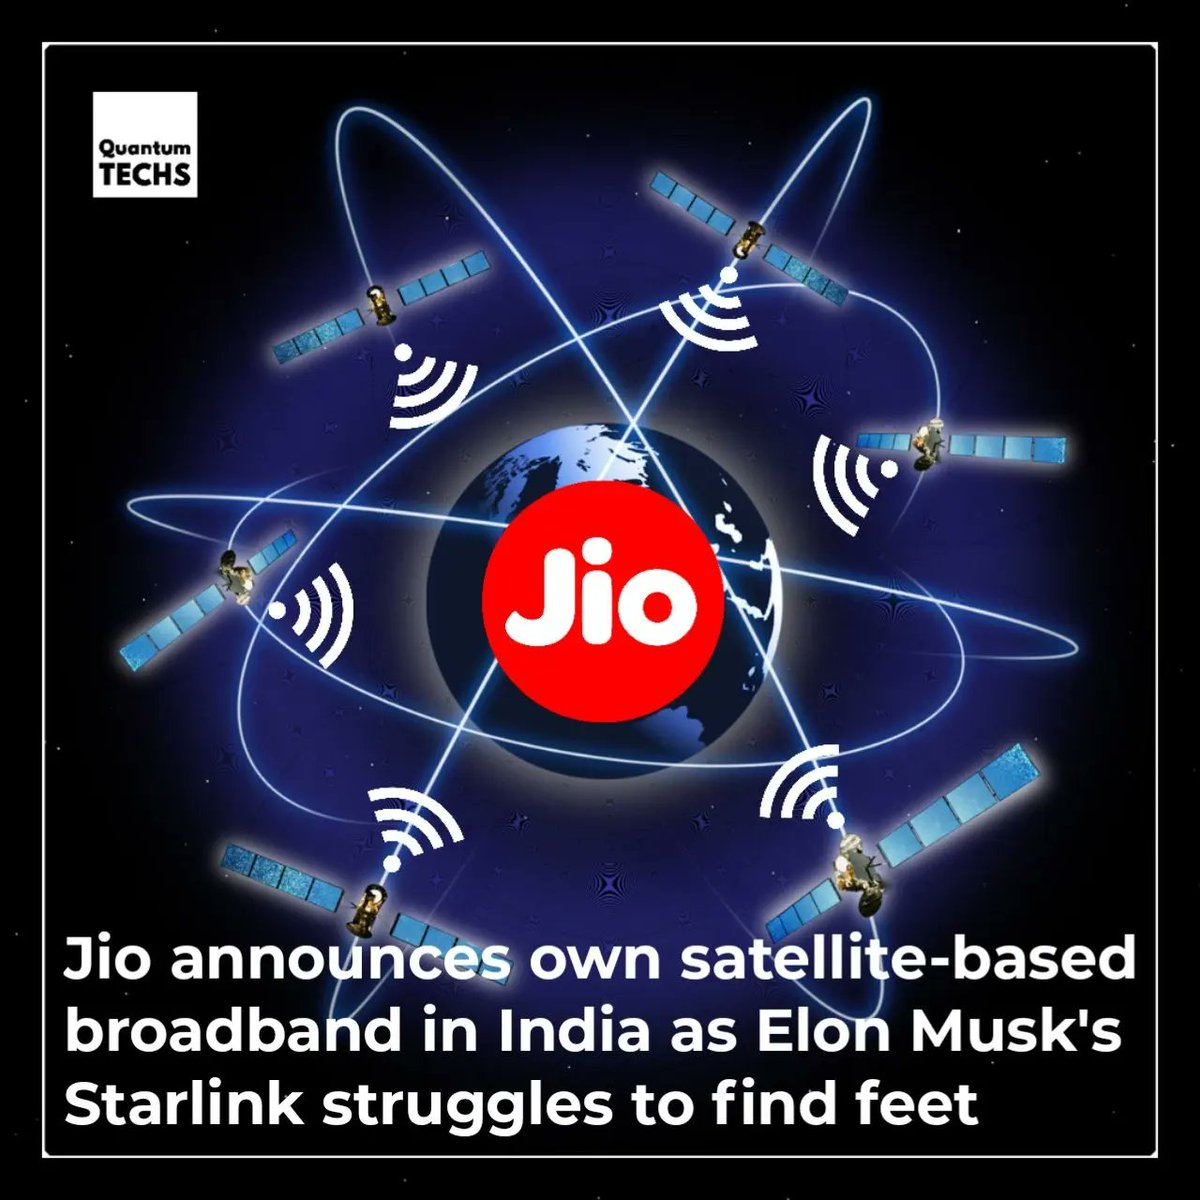 Reliance Jio has announced its foray into satellite-based internet with a joint venture with SES -- a Luxembourg based satellite content connectivity solutions provider, under the name of Jio Space Technology Limited. #jiofiberbroadband #jiofiberchennai @JioFiberChennai